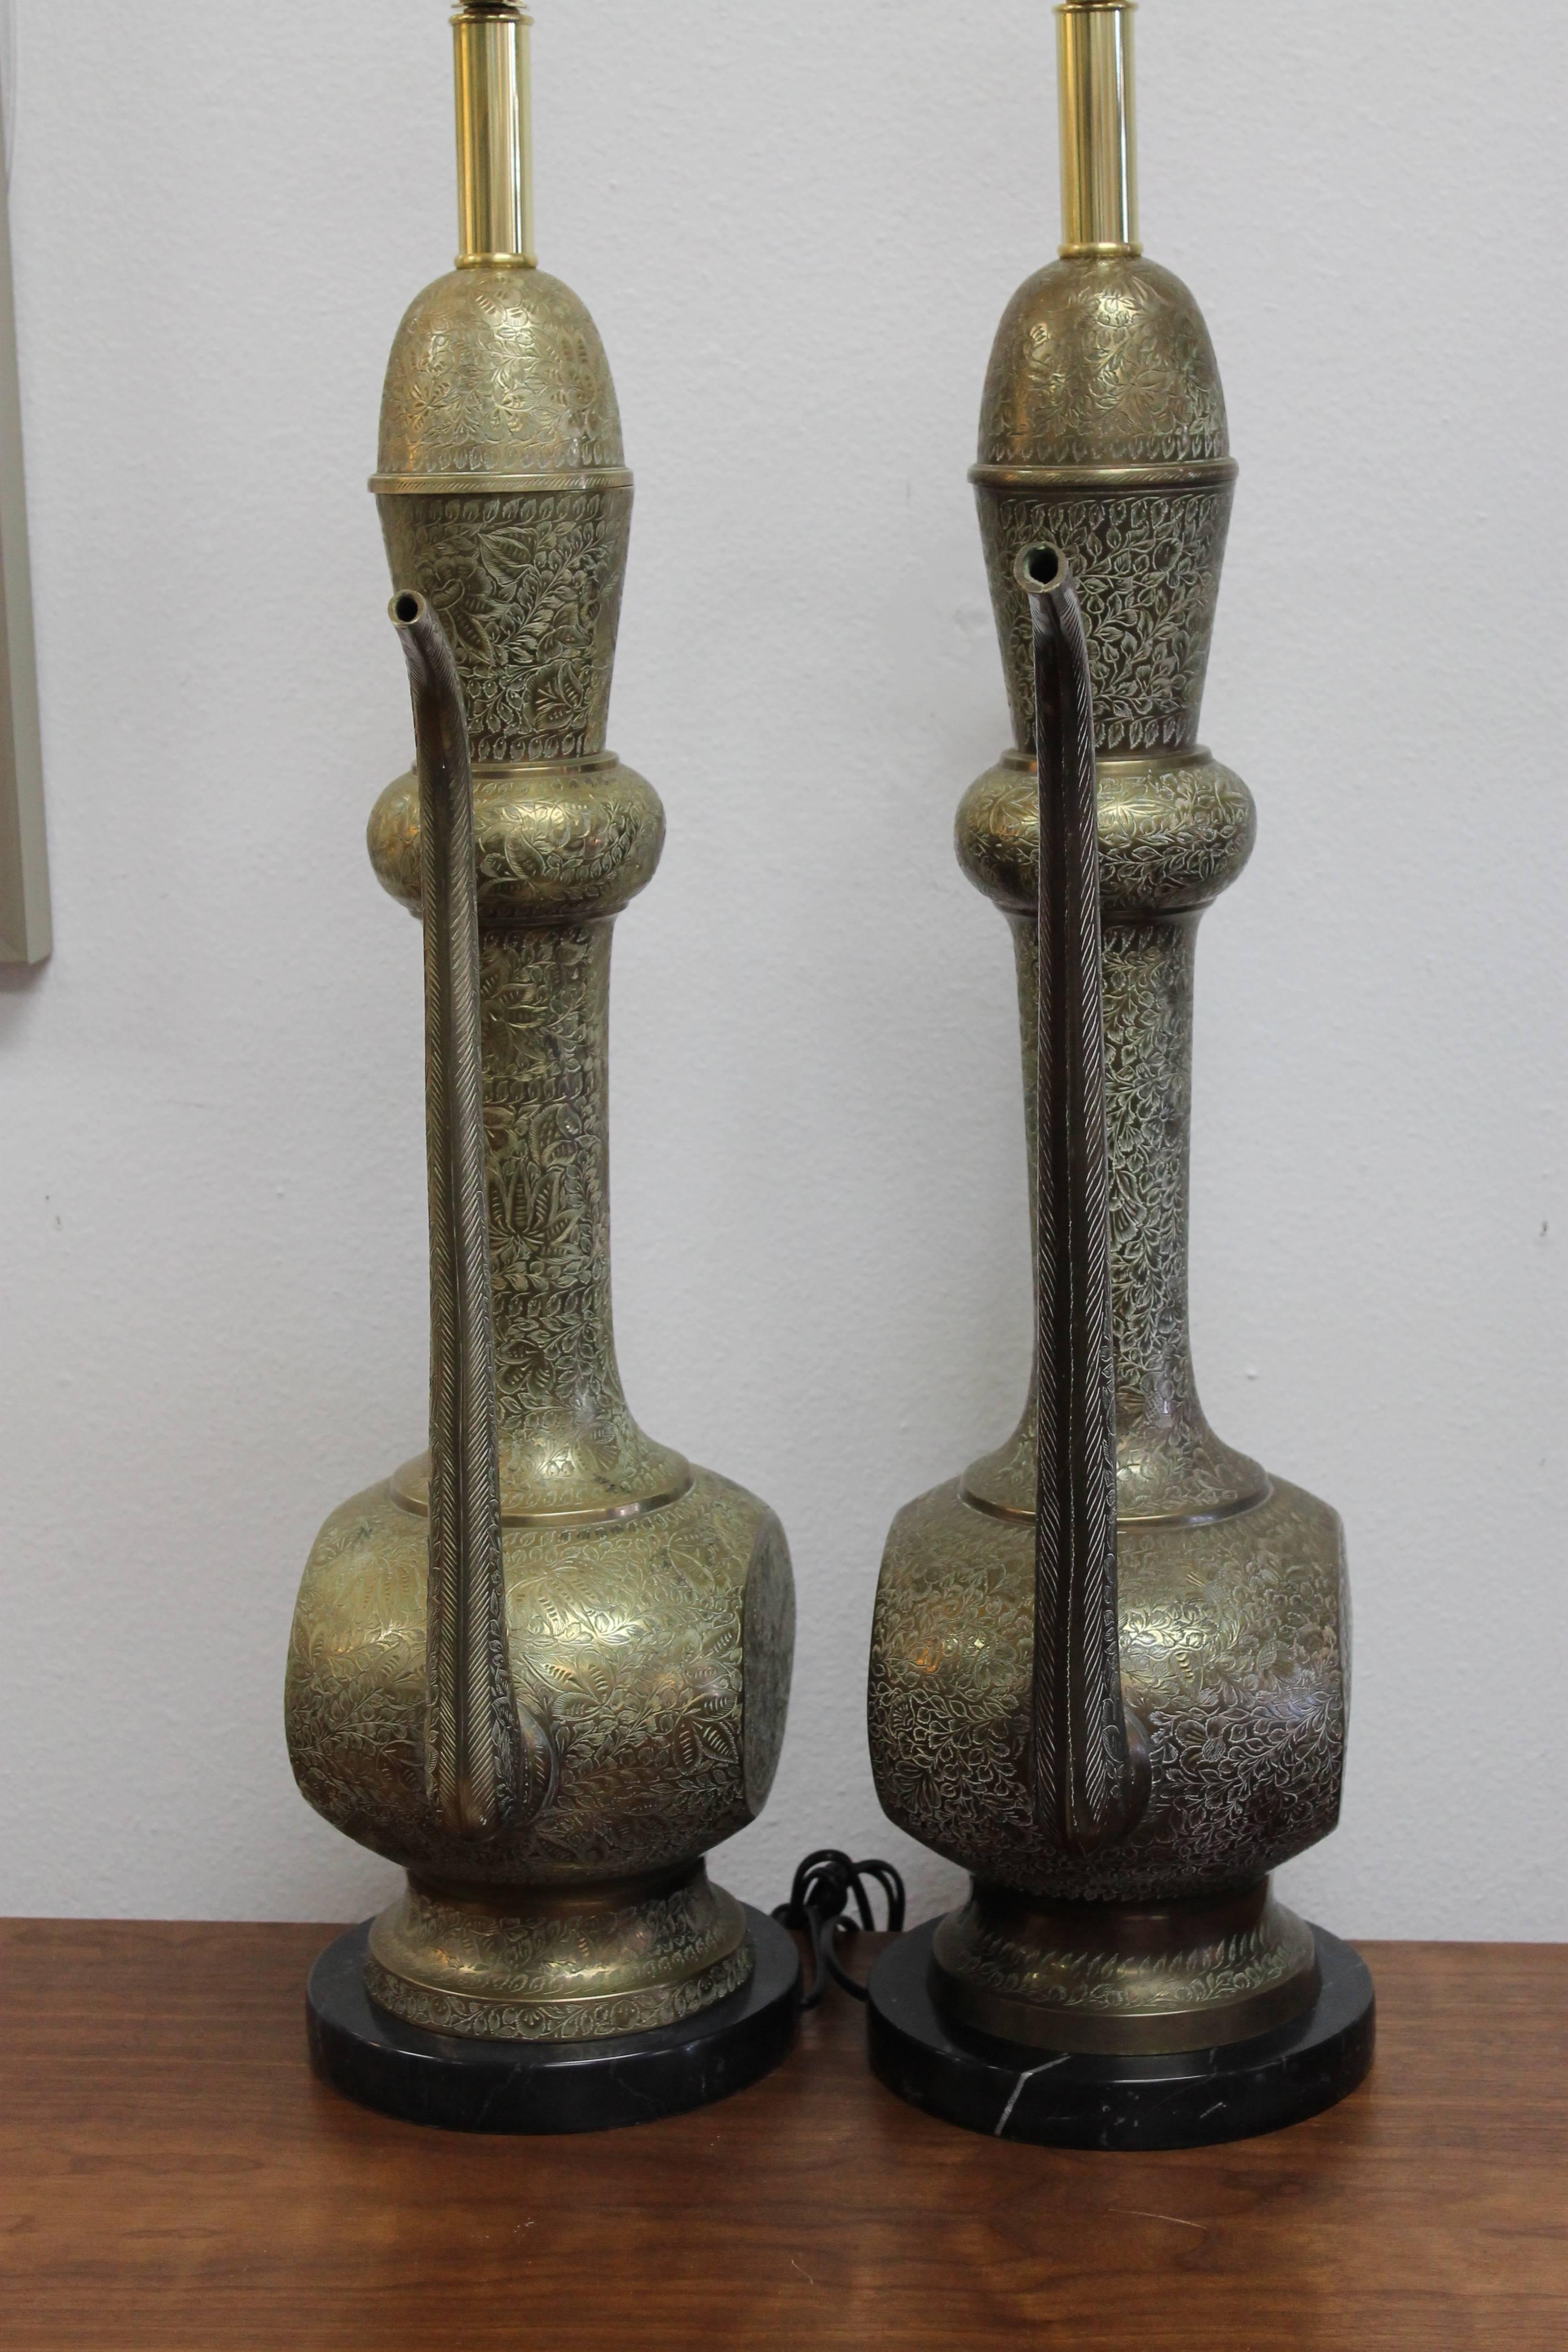 Moroccan Pair of Engraved Brass Ewer Lamps